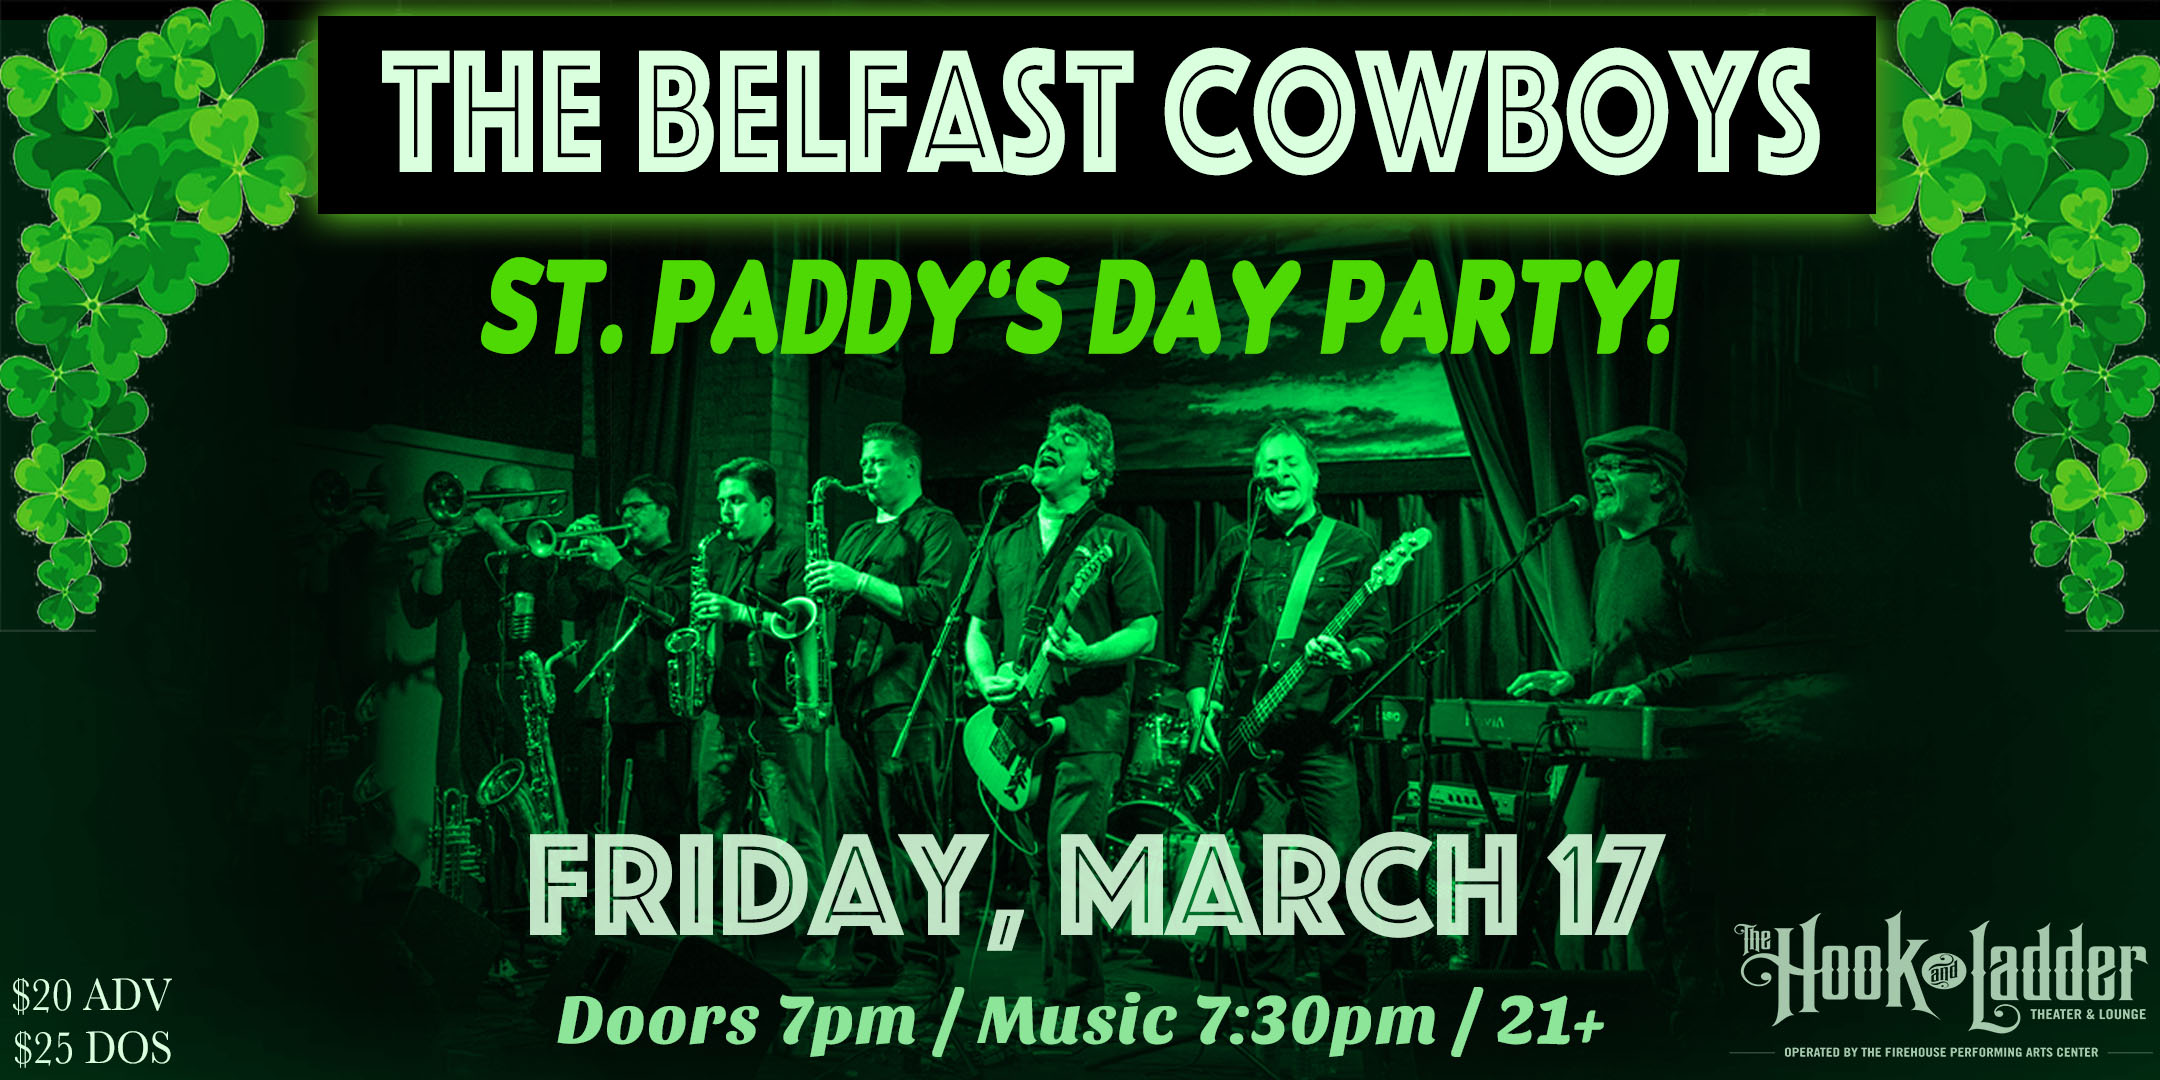 The Belfast Cowboys St. Paddy’s Day Party! Friday, March 17, 2023 at The Hook and Ladder Theater Doors 7pm :: Music 7:30pm :: 21+